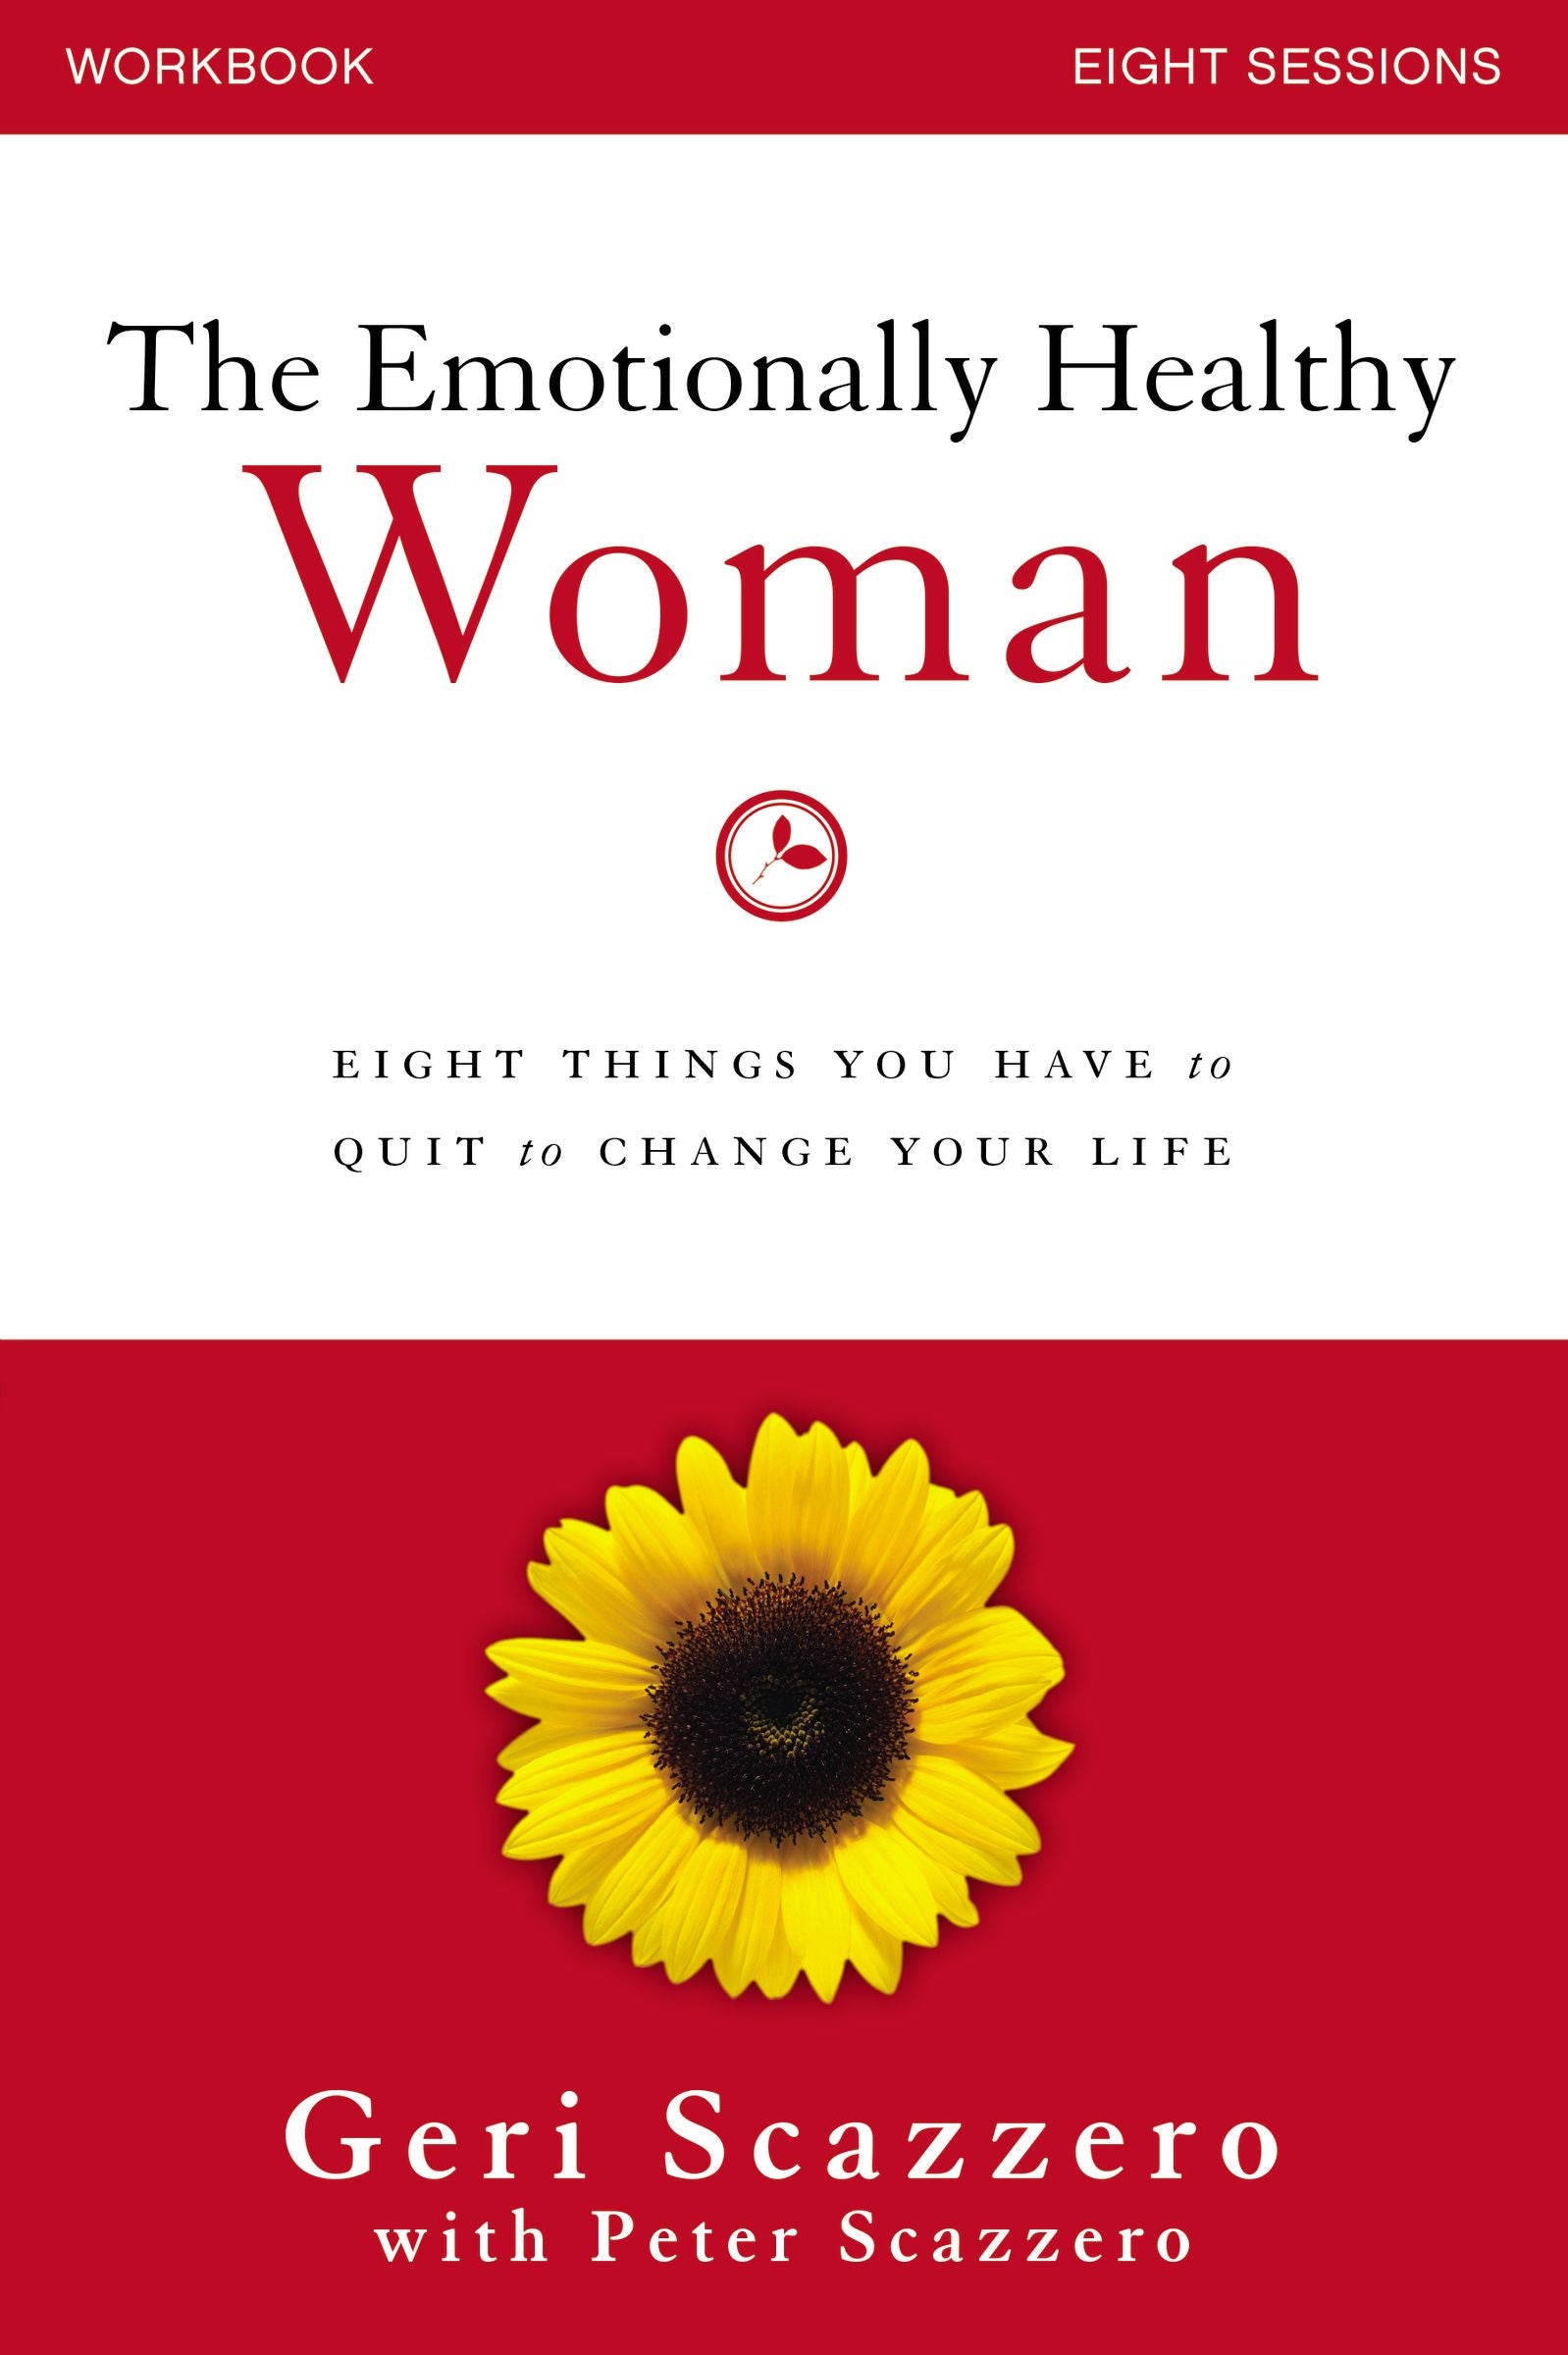 Image of The Emotionally Healthy Woman Workbook other